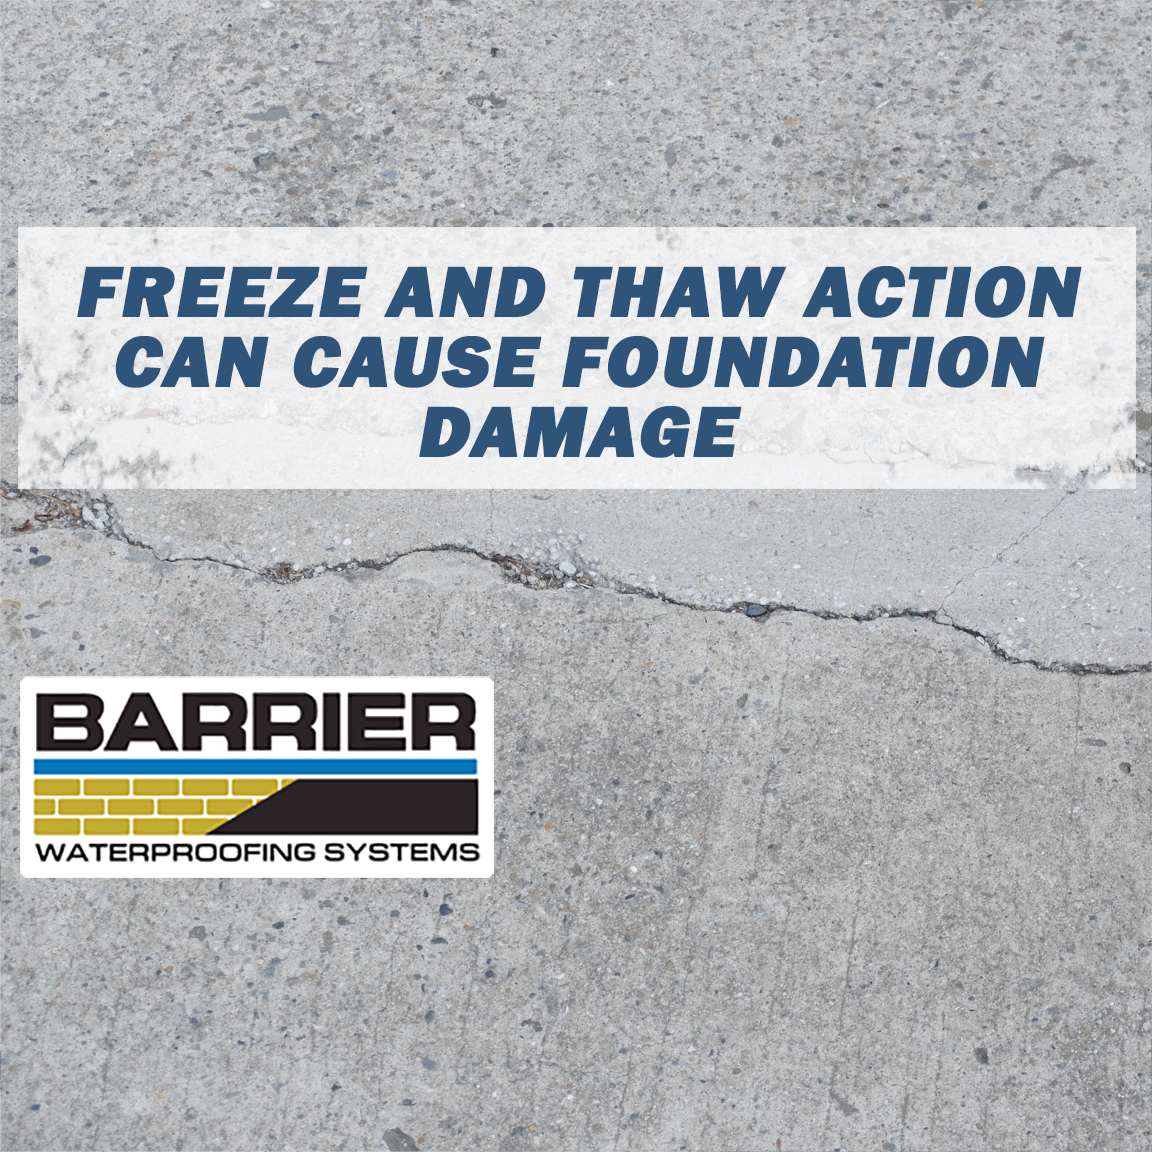 Cracked concrete floro depicting freeze and thaw action causing foundation damage